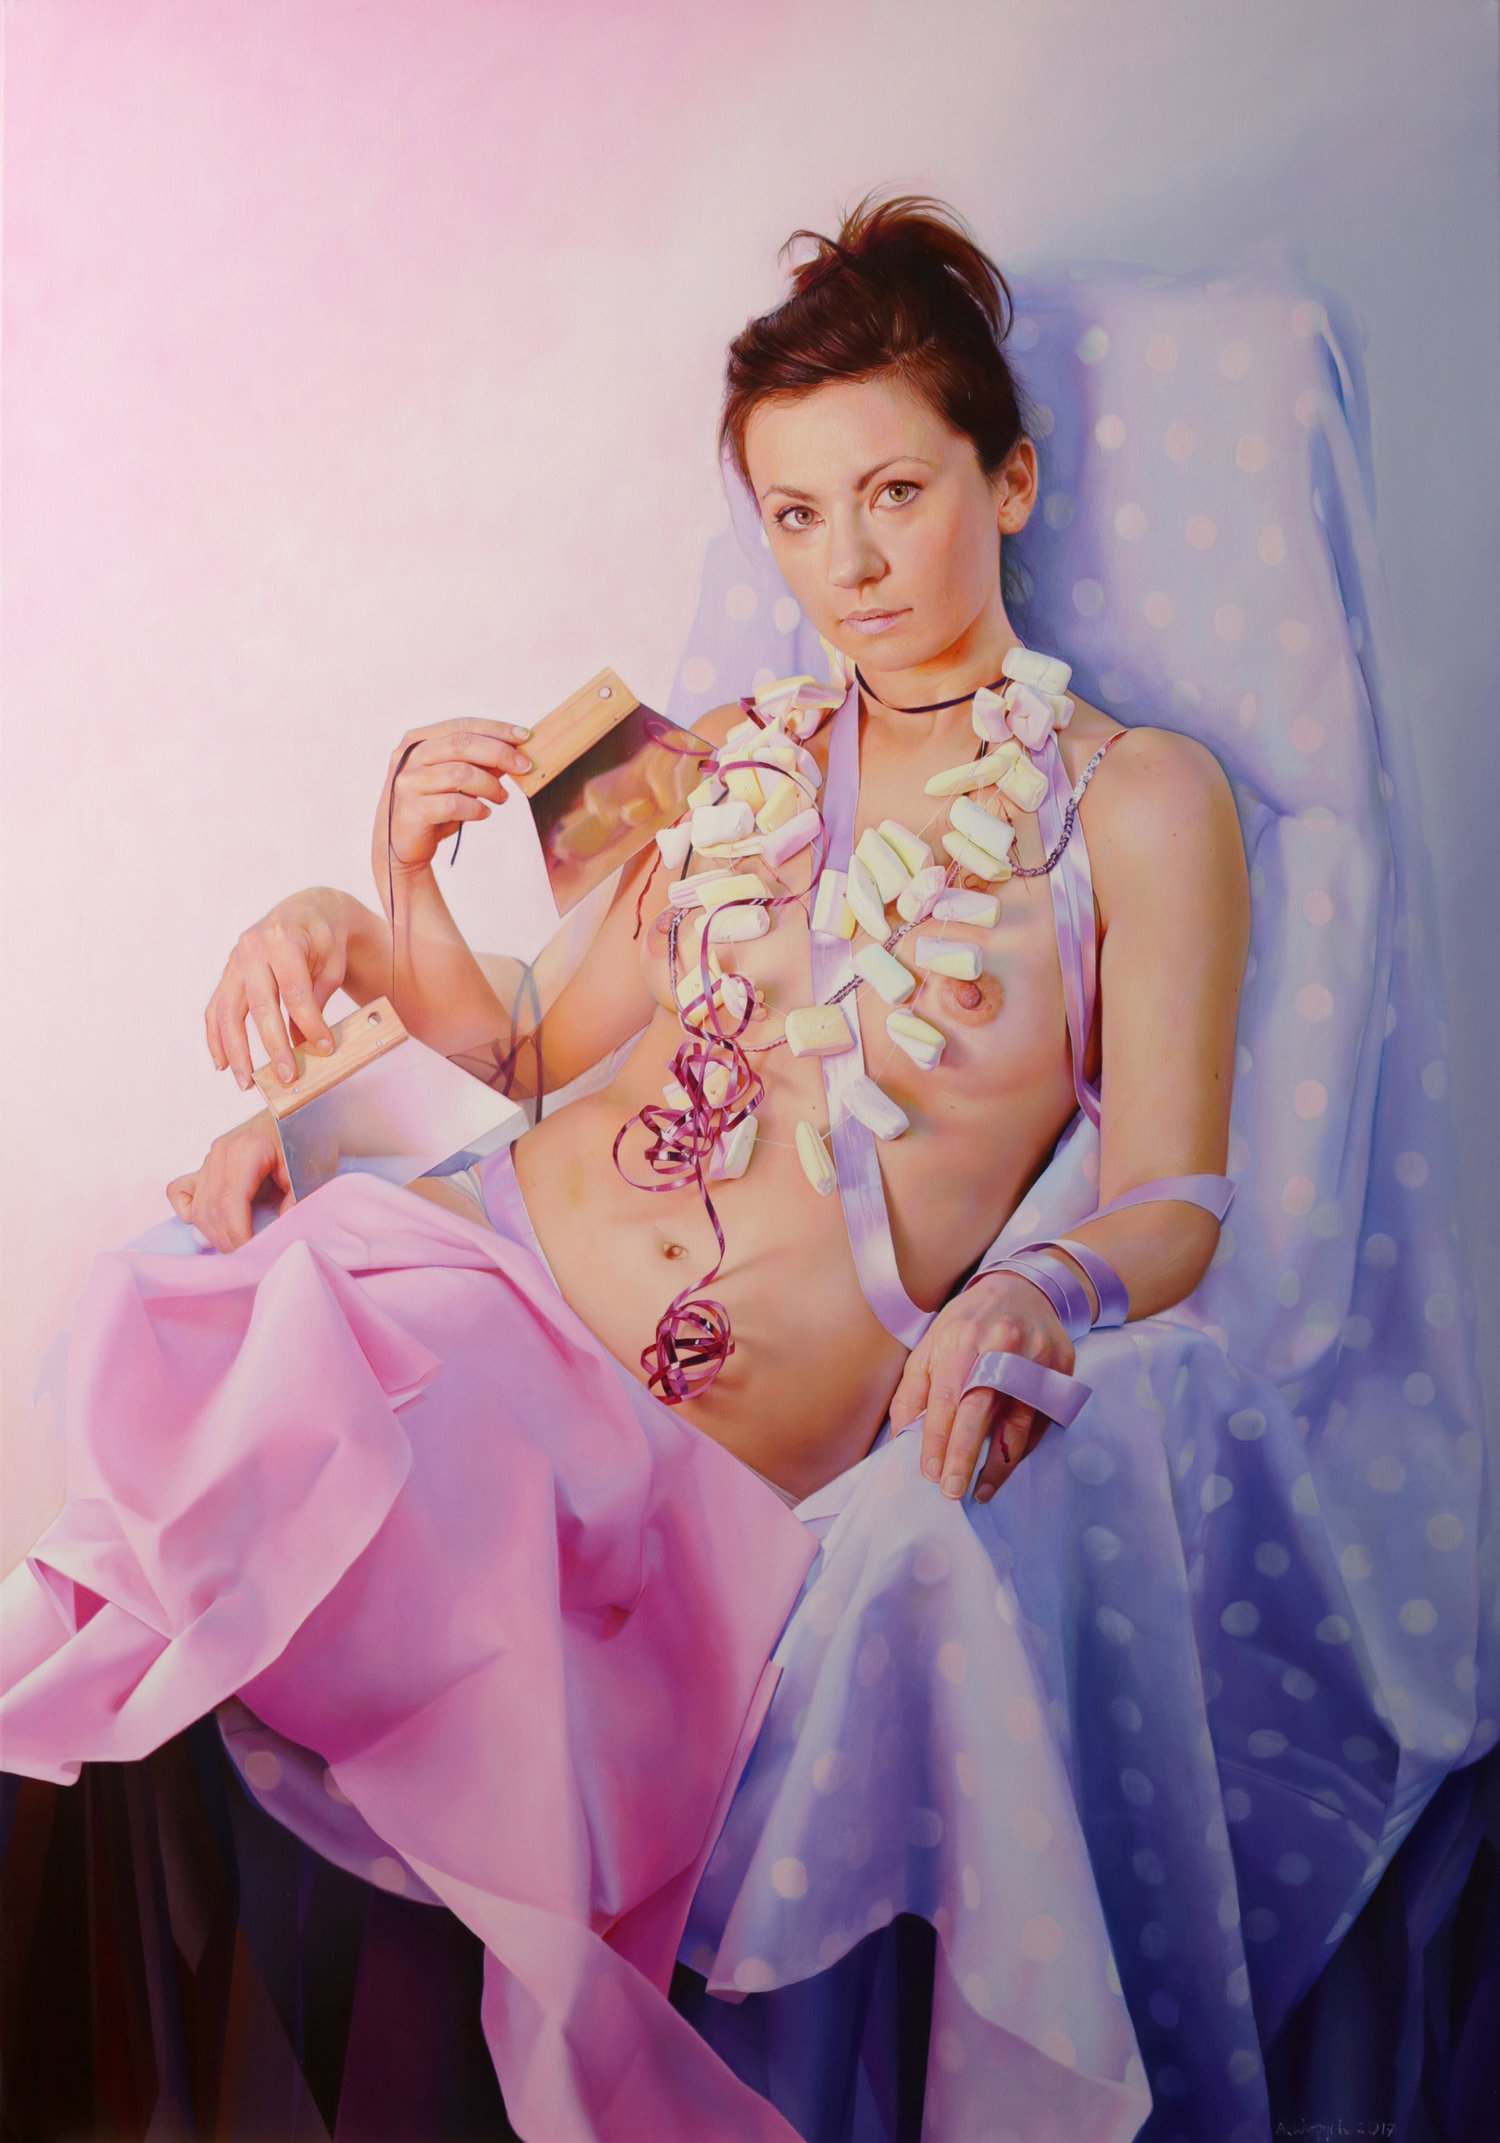 Anna Wypych  |  Too Sweet to be Serious (Boson 3)  |  Oil on canvas  |  39 ½ x 27 ½ inches or 100 x 70 cm